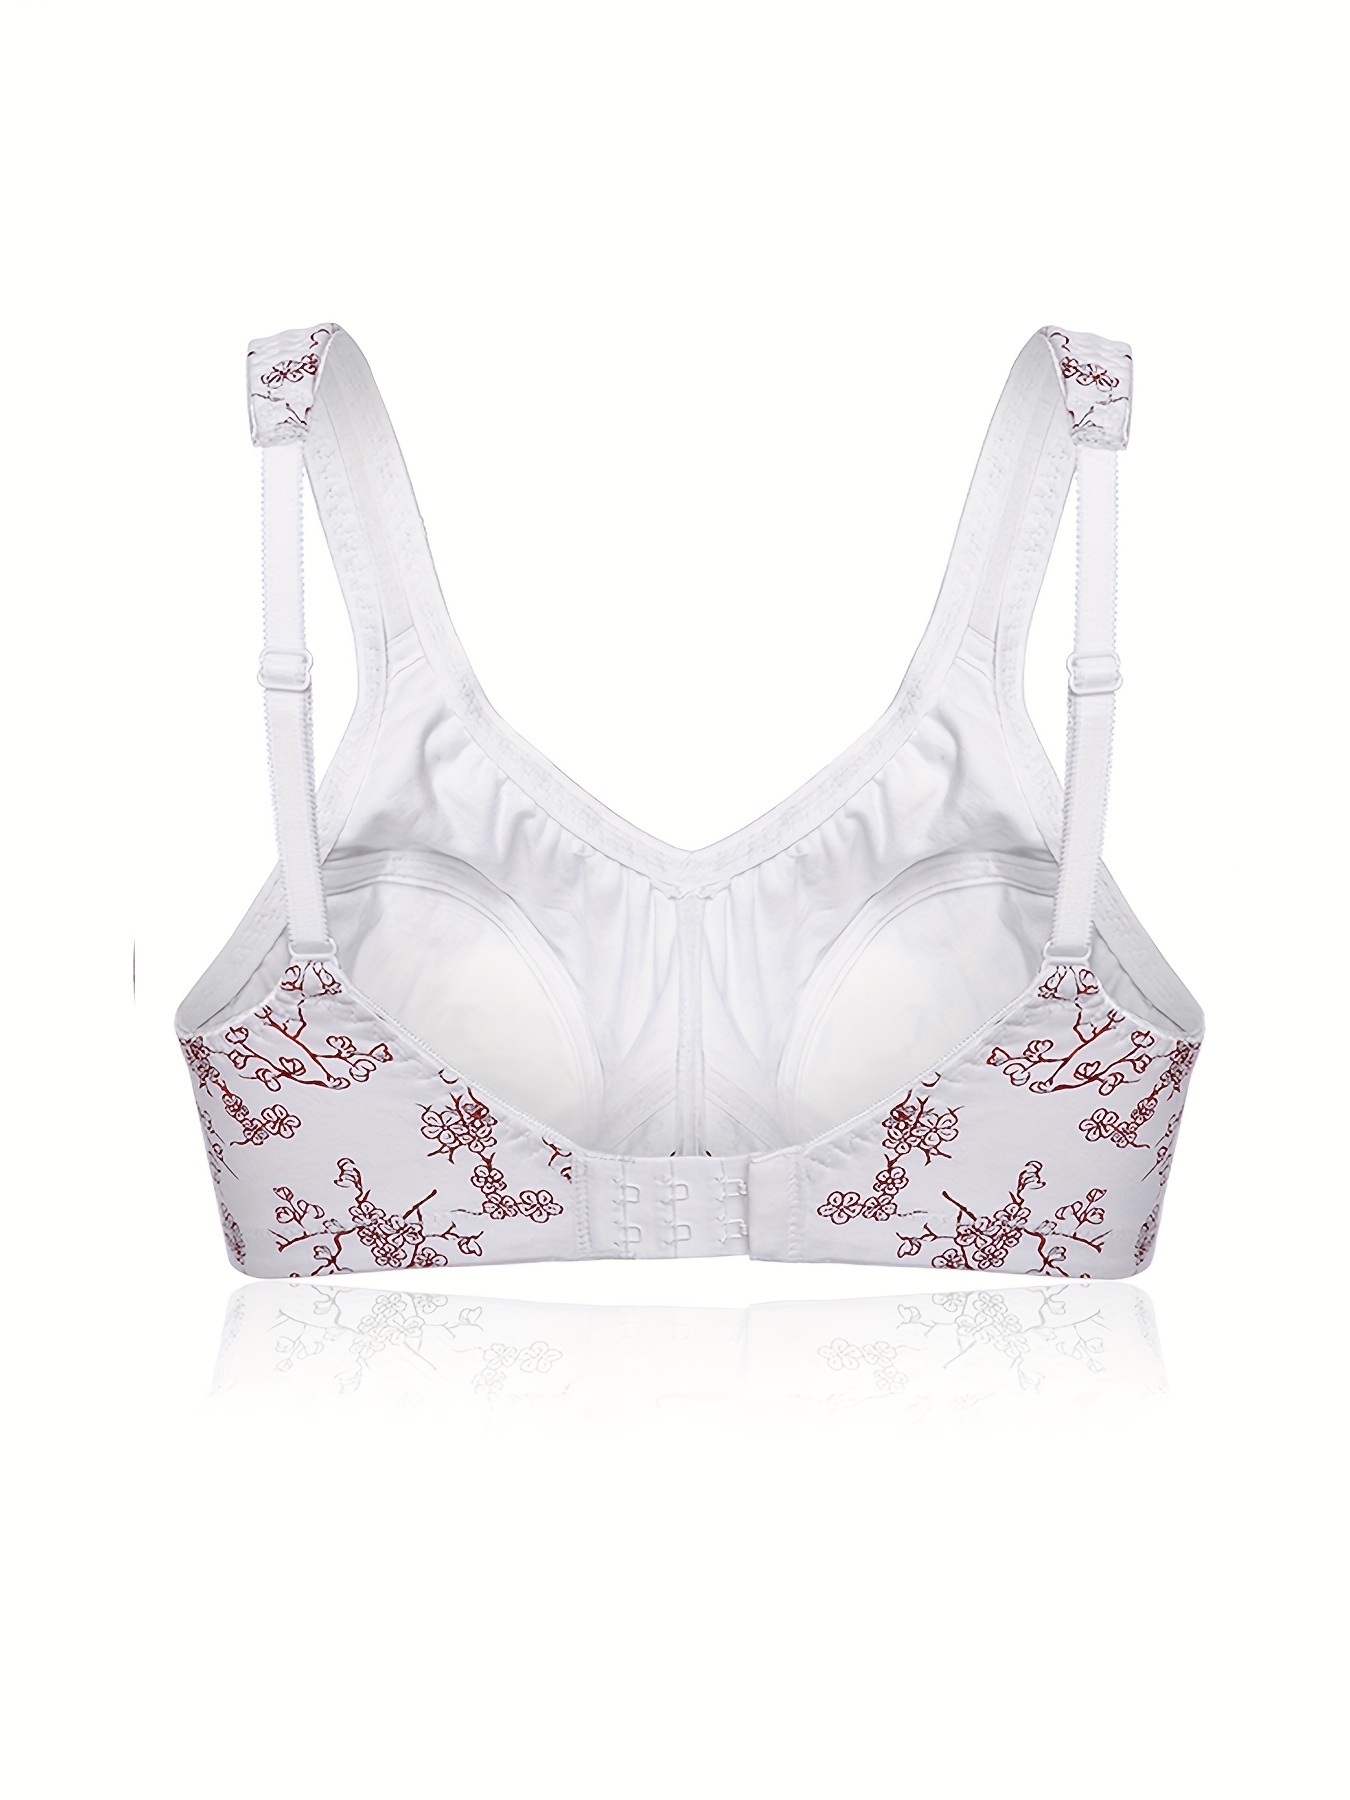  Womens Full Coverage Floral Lace Underwired Bra Plus Size  Non Padded Comfort Bra 50DDD White